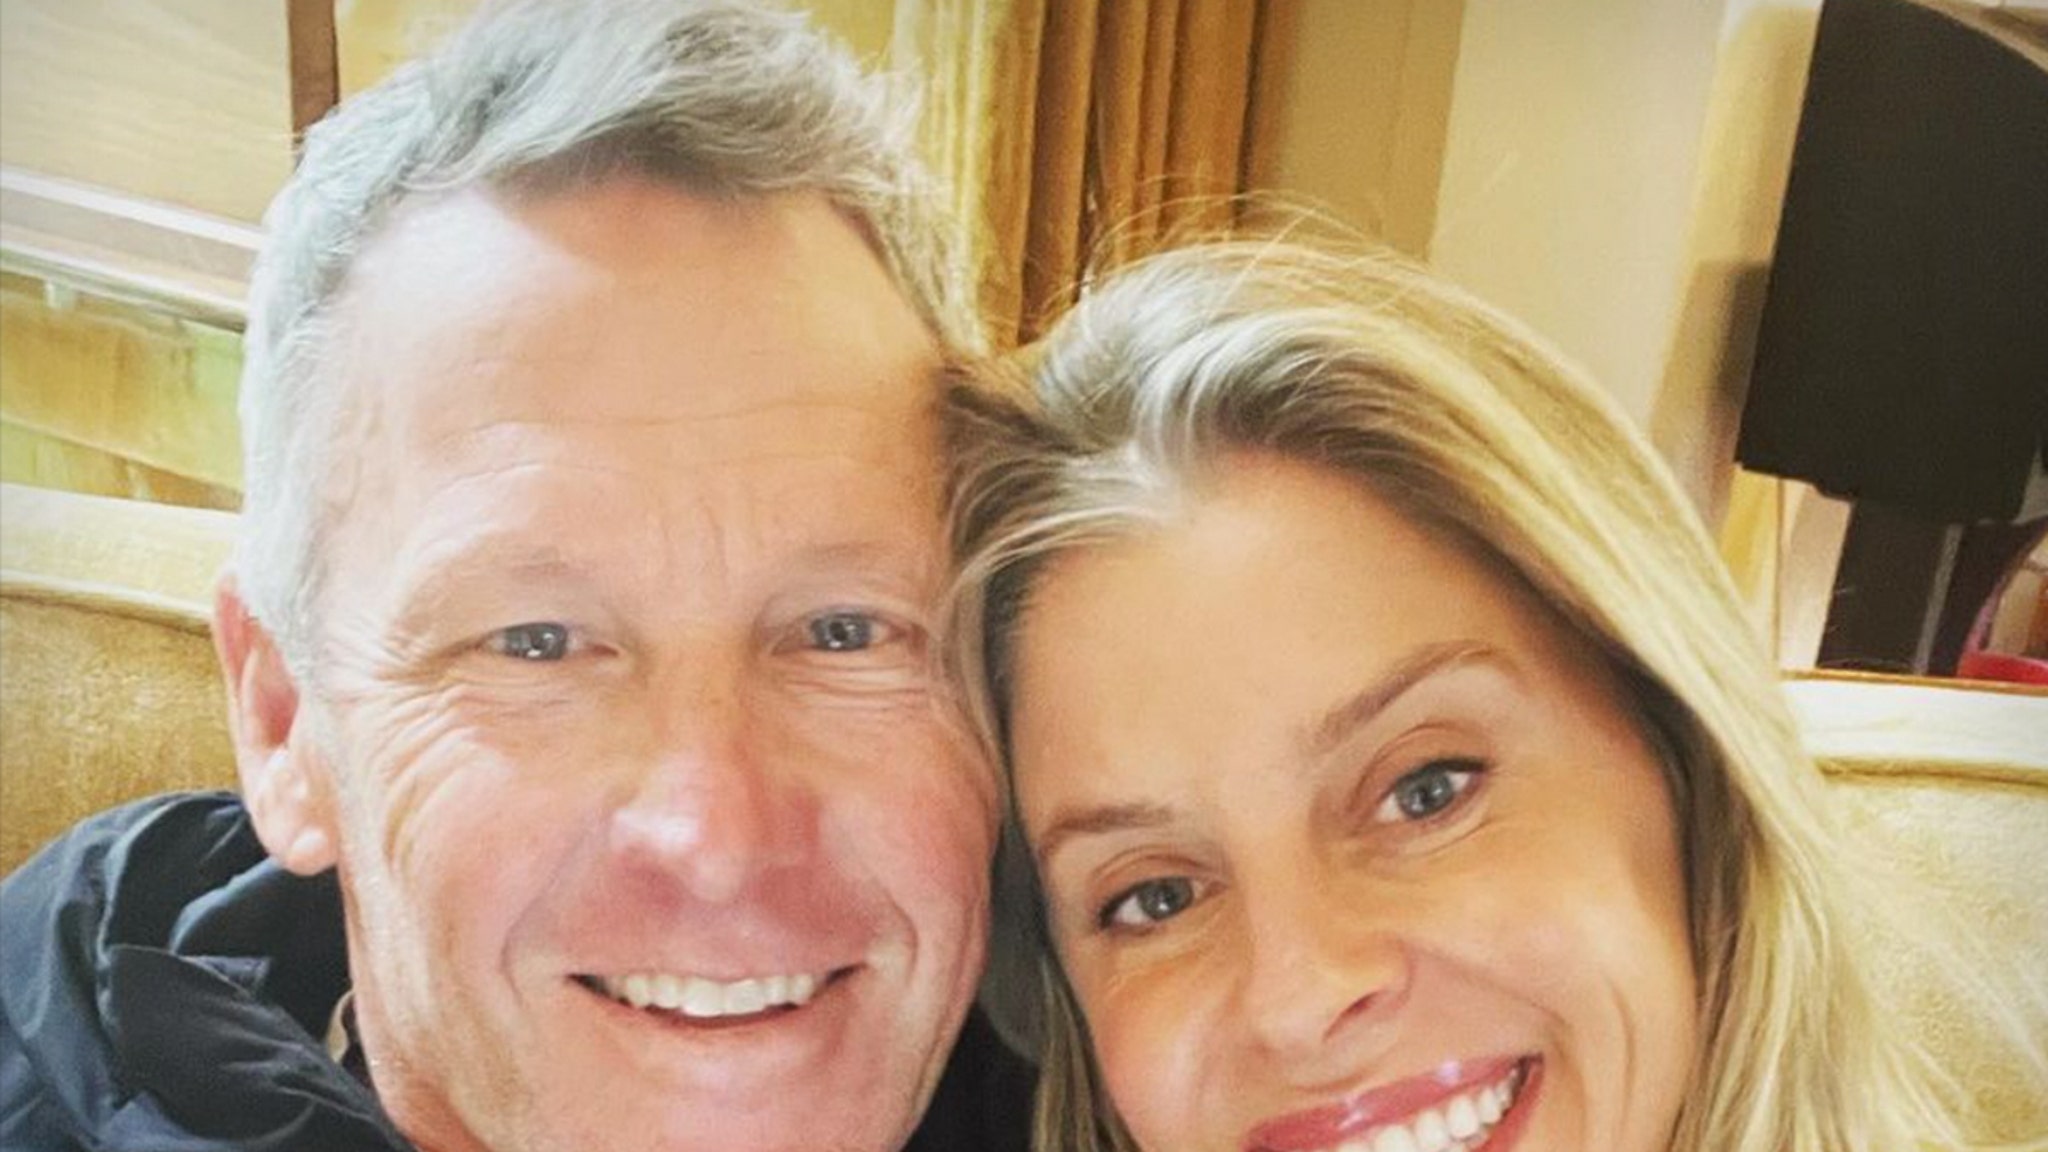 Lance Armstrong Marries Longtime Girlfriend In France, 'Best. Day. Ever.' - TMZ